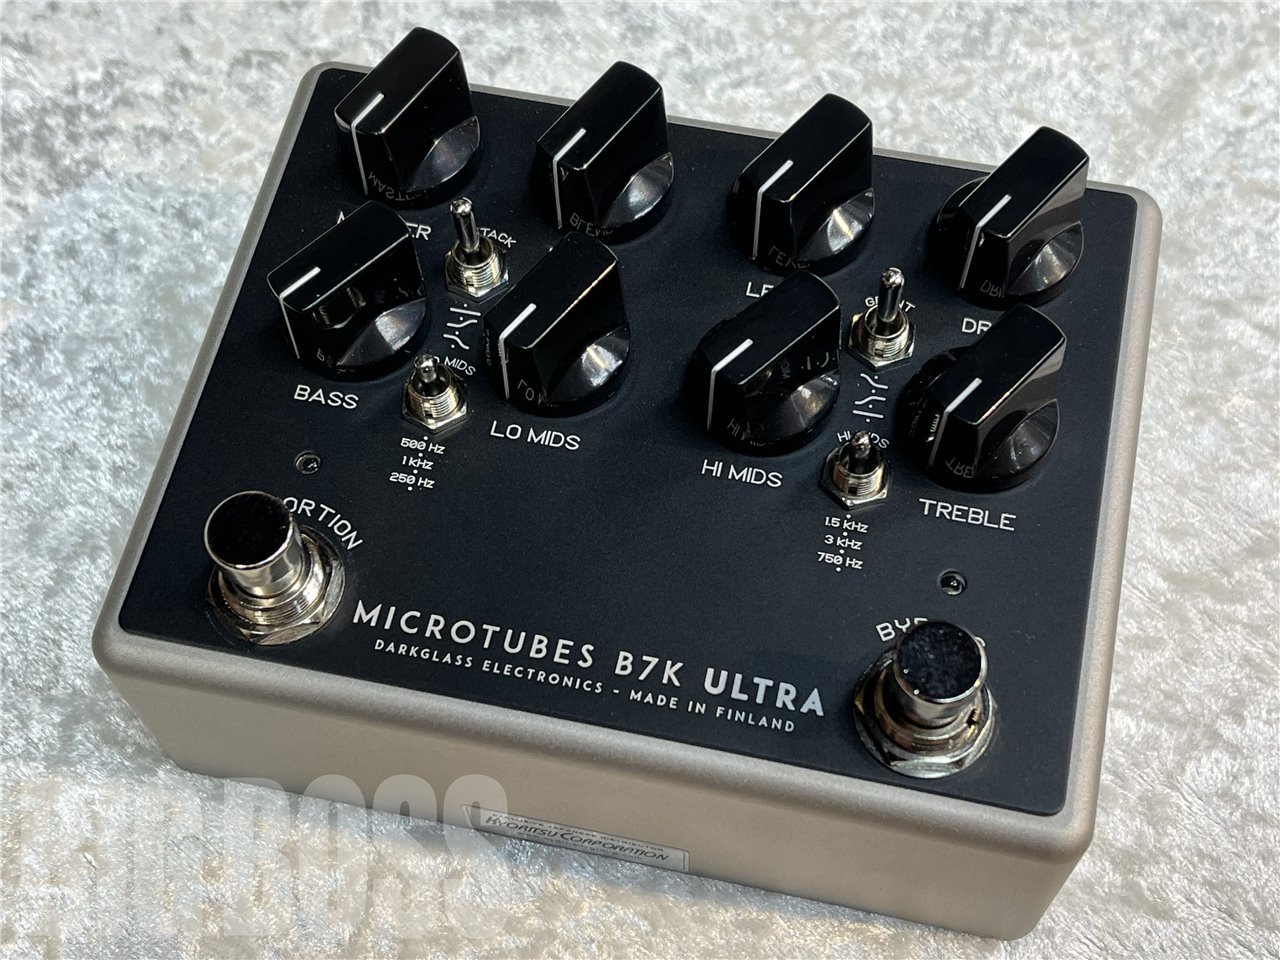 Microtubes B7k ULTRA with AUX IN